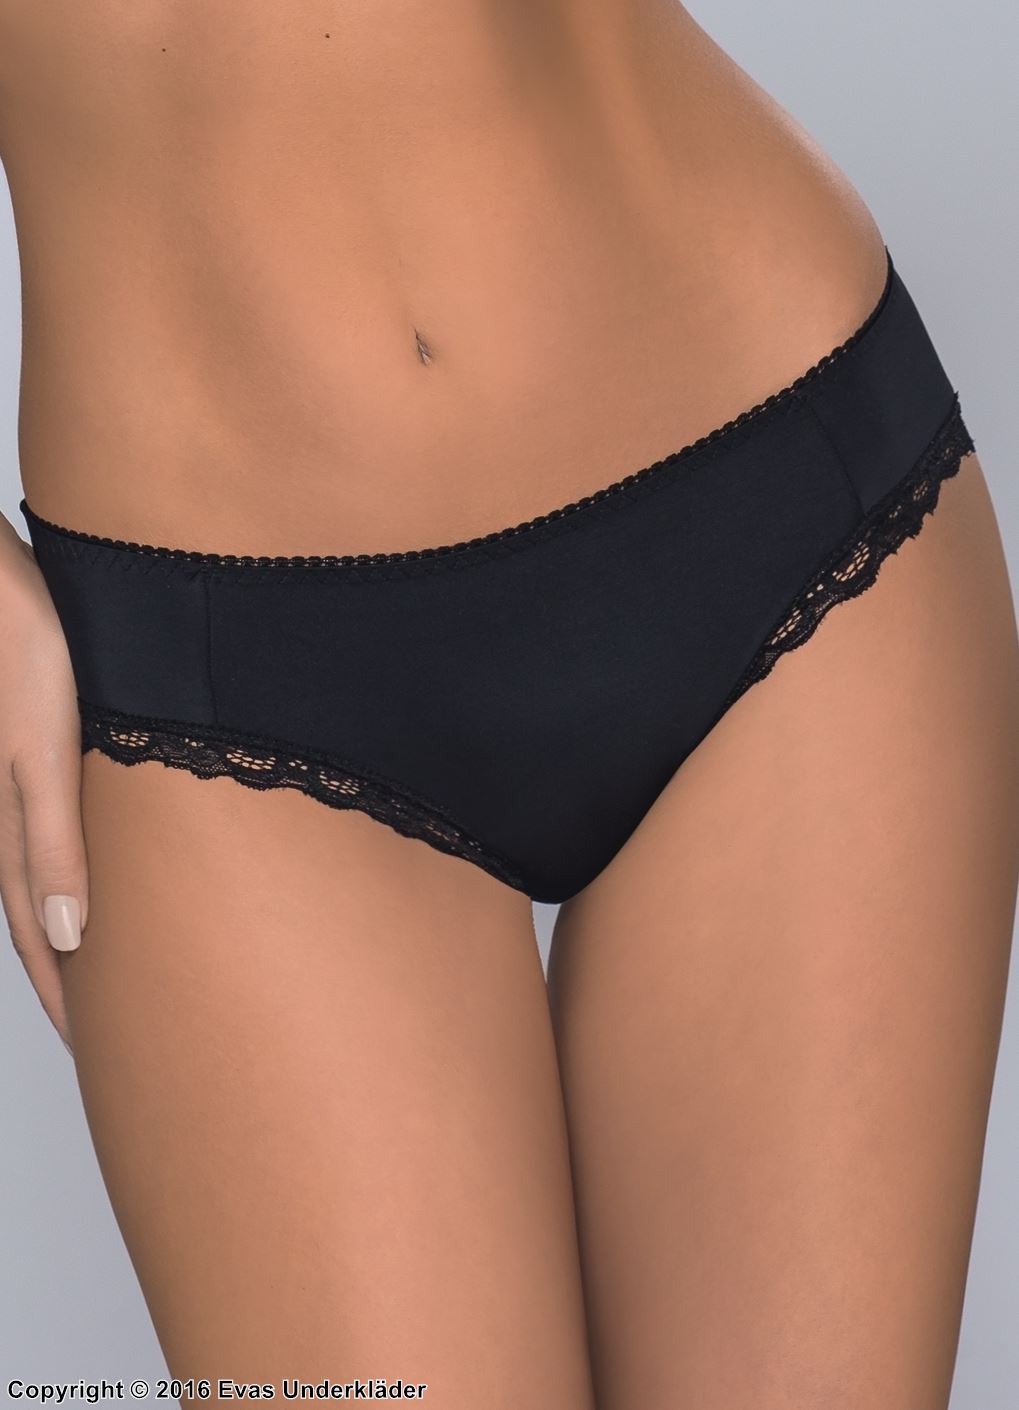 Classic briefs, smooth and comfortable fabric, lace edge, plus size